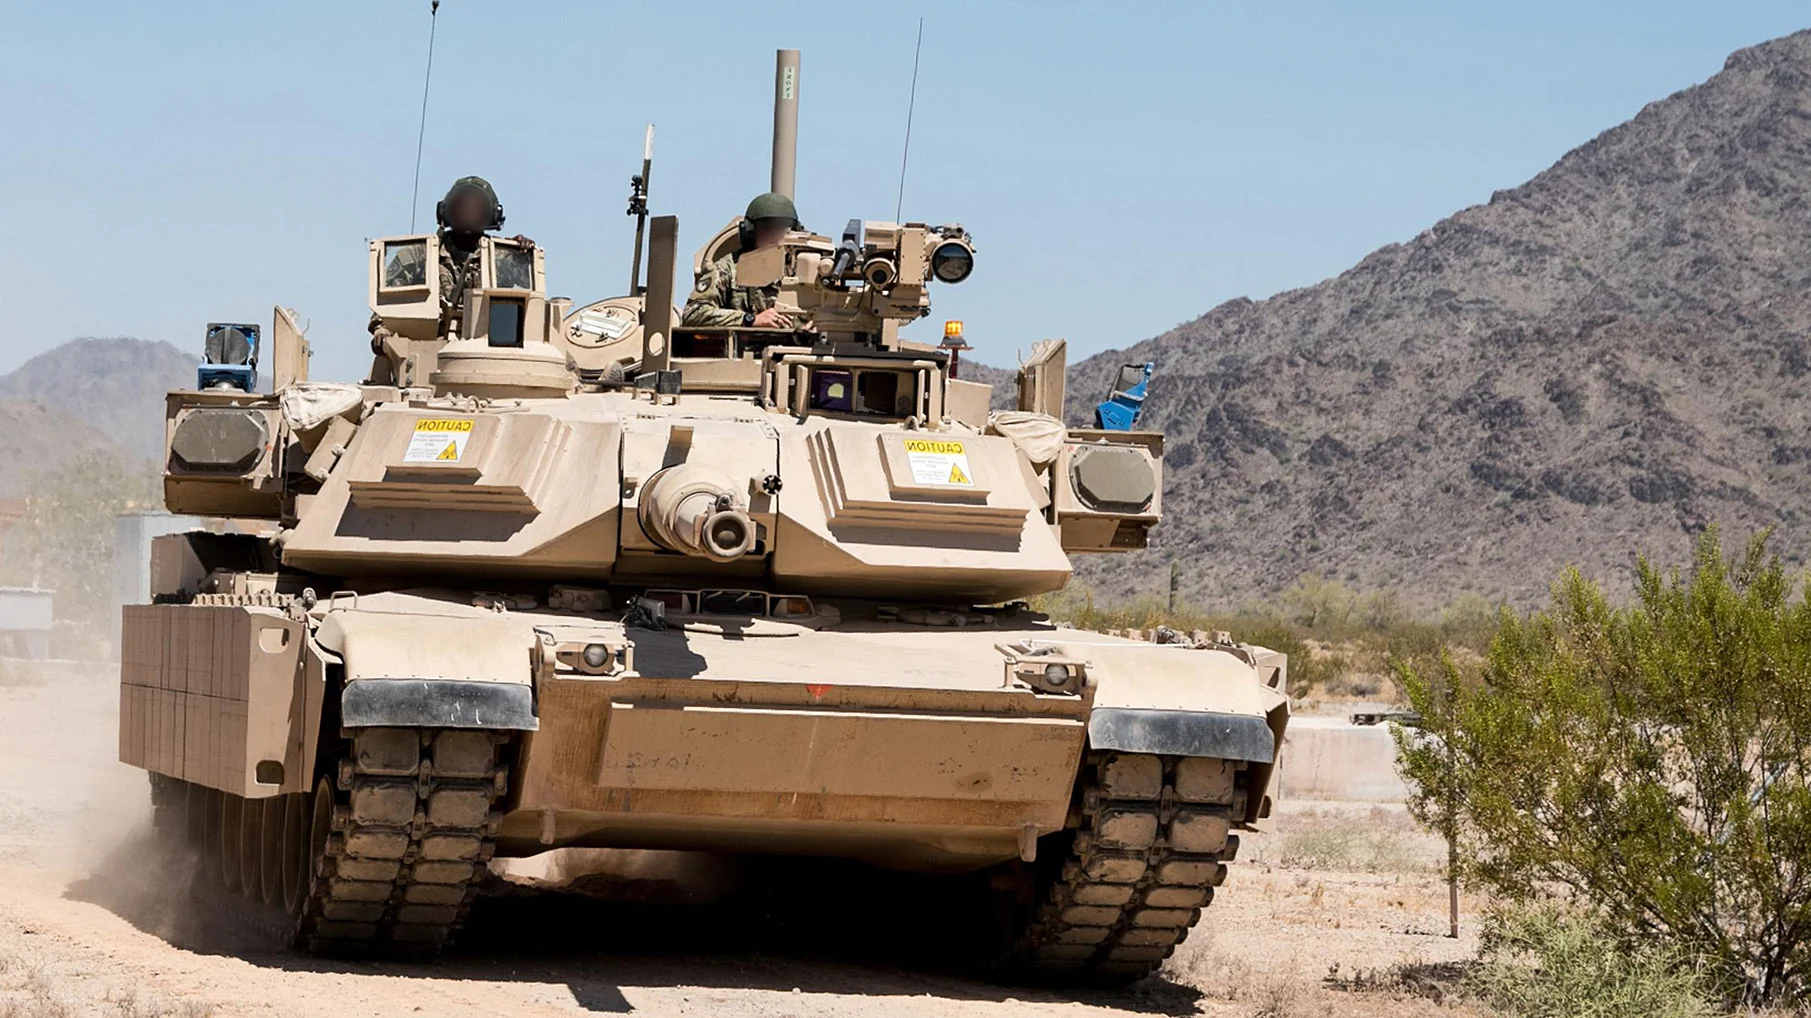 M1A1 Abrams tank deliveries to Ukraine will not disrupt production schedules for other customers